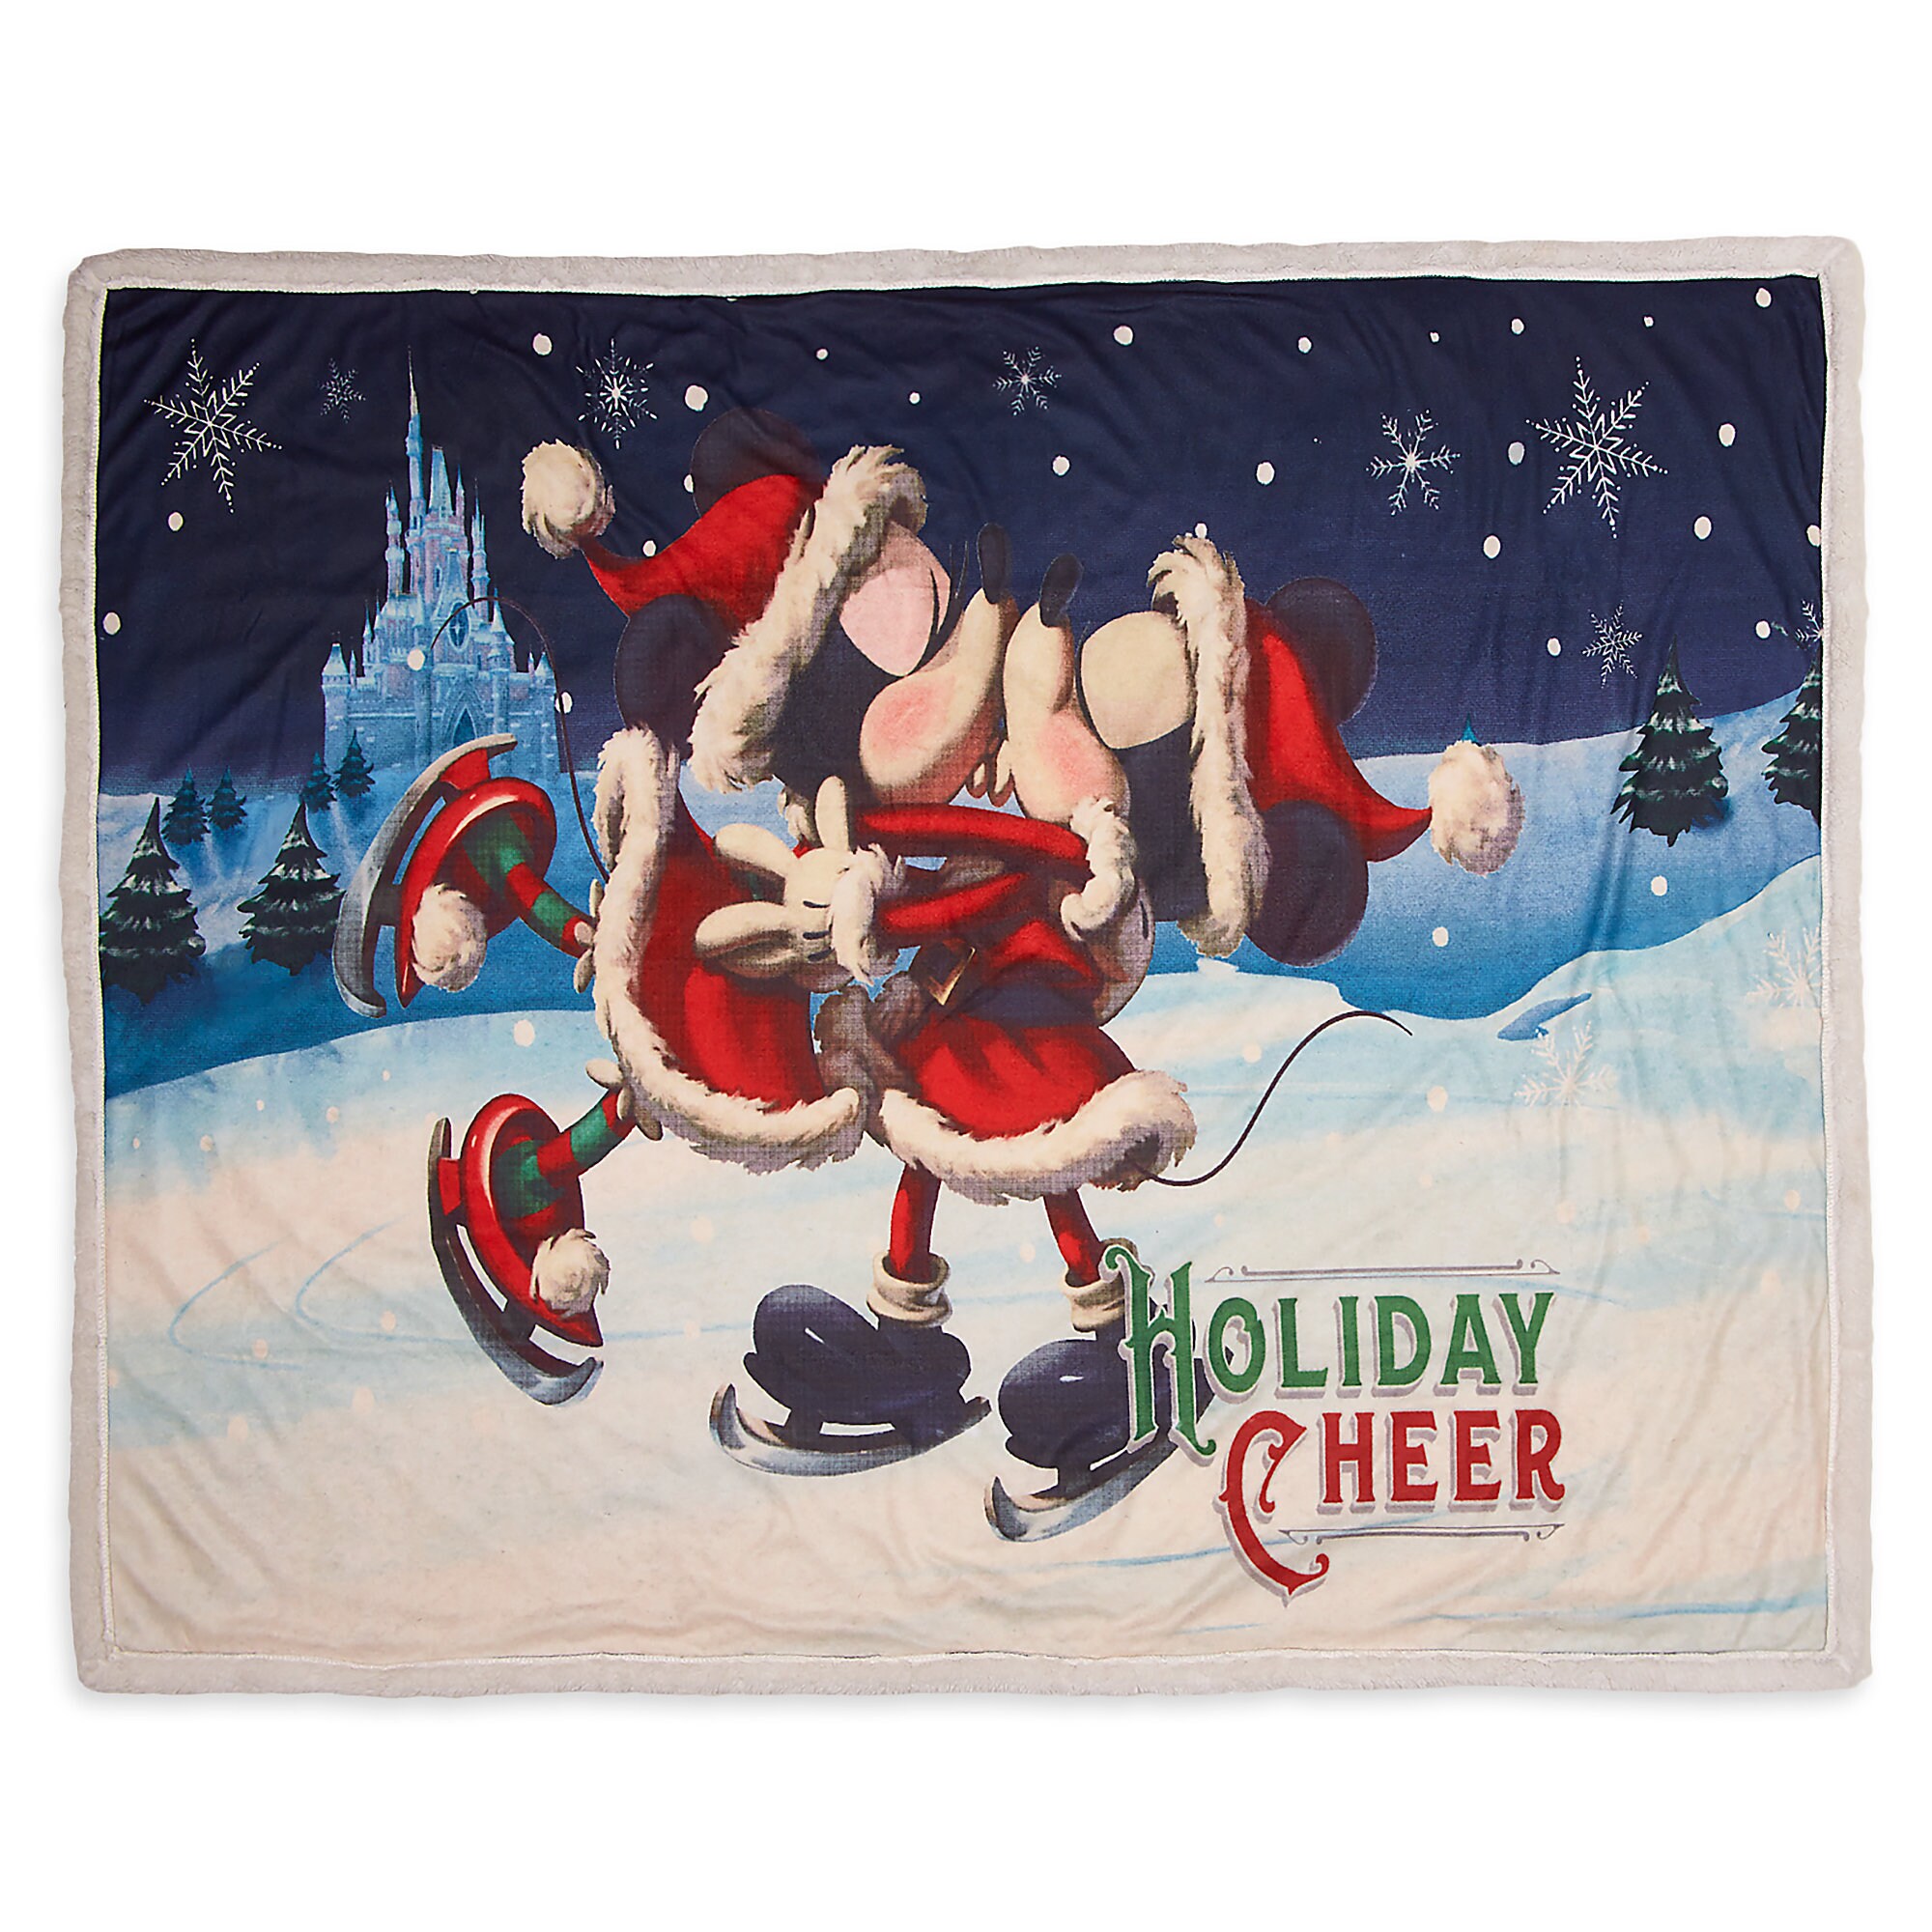 Santa Mickey and Minnie Mouse Reversible Throw